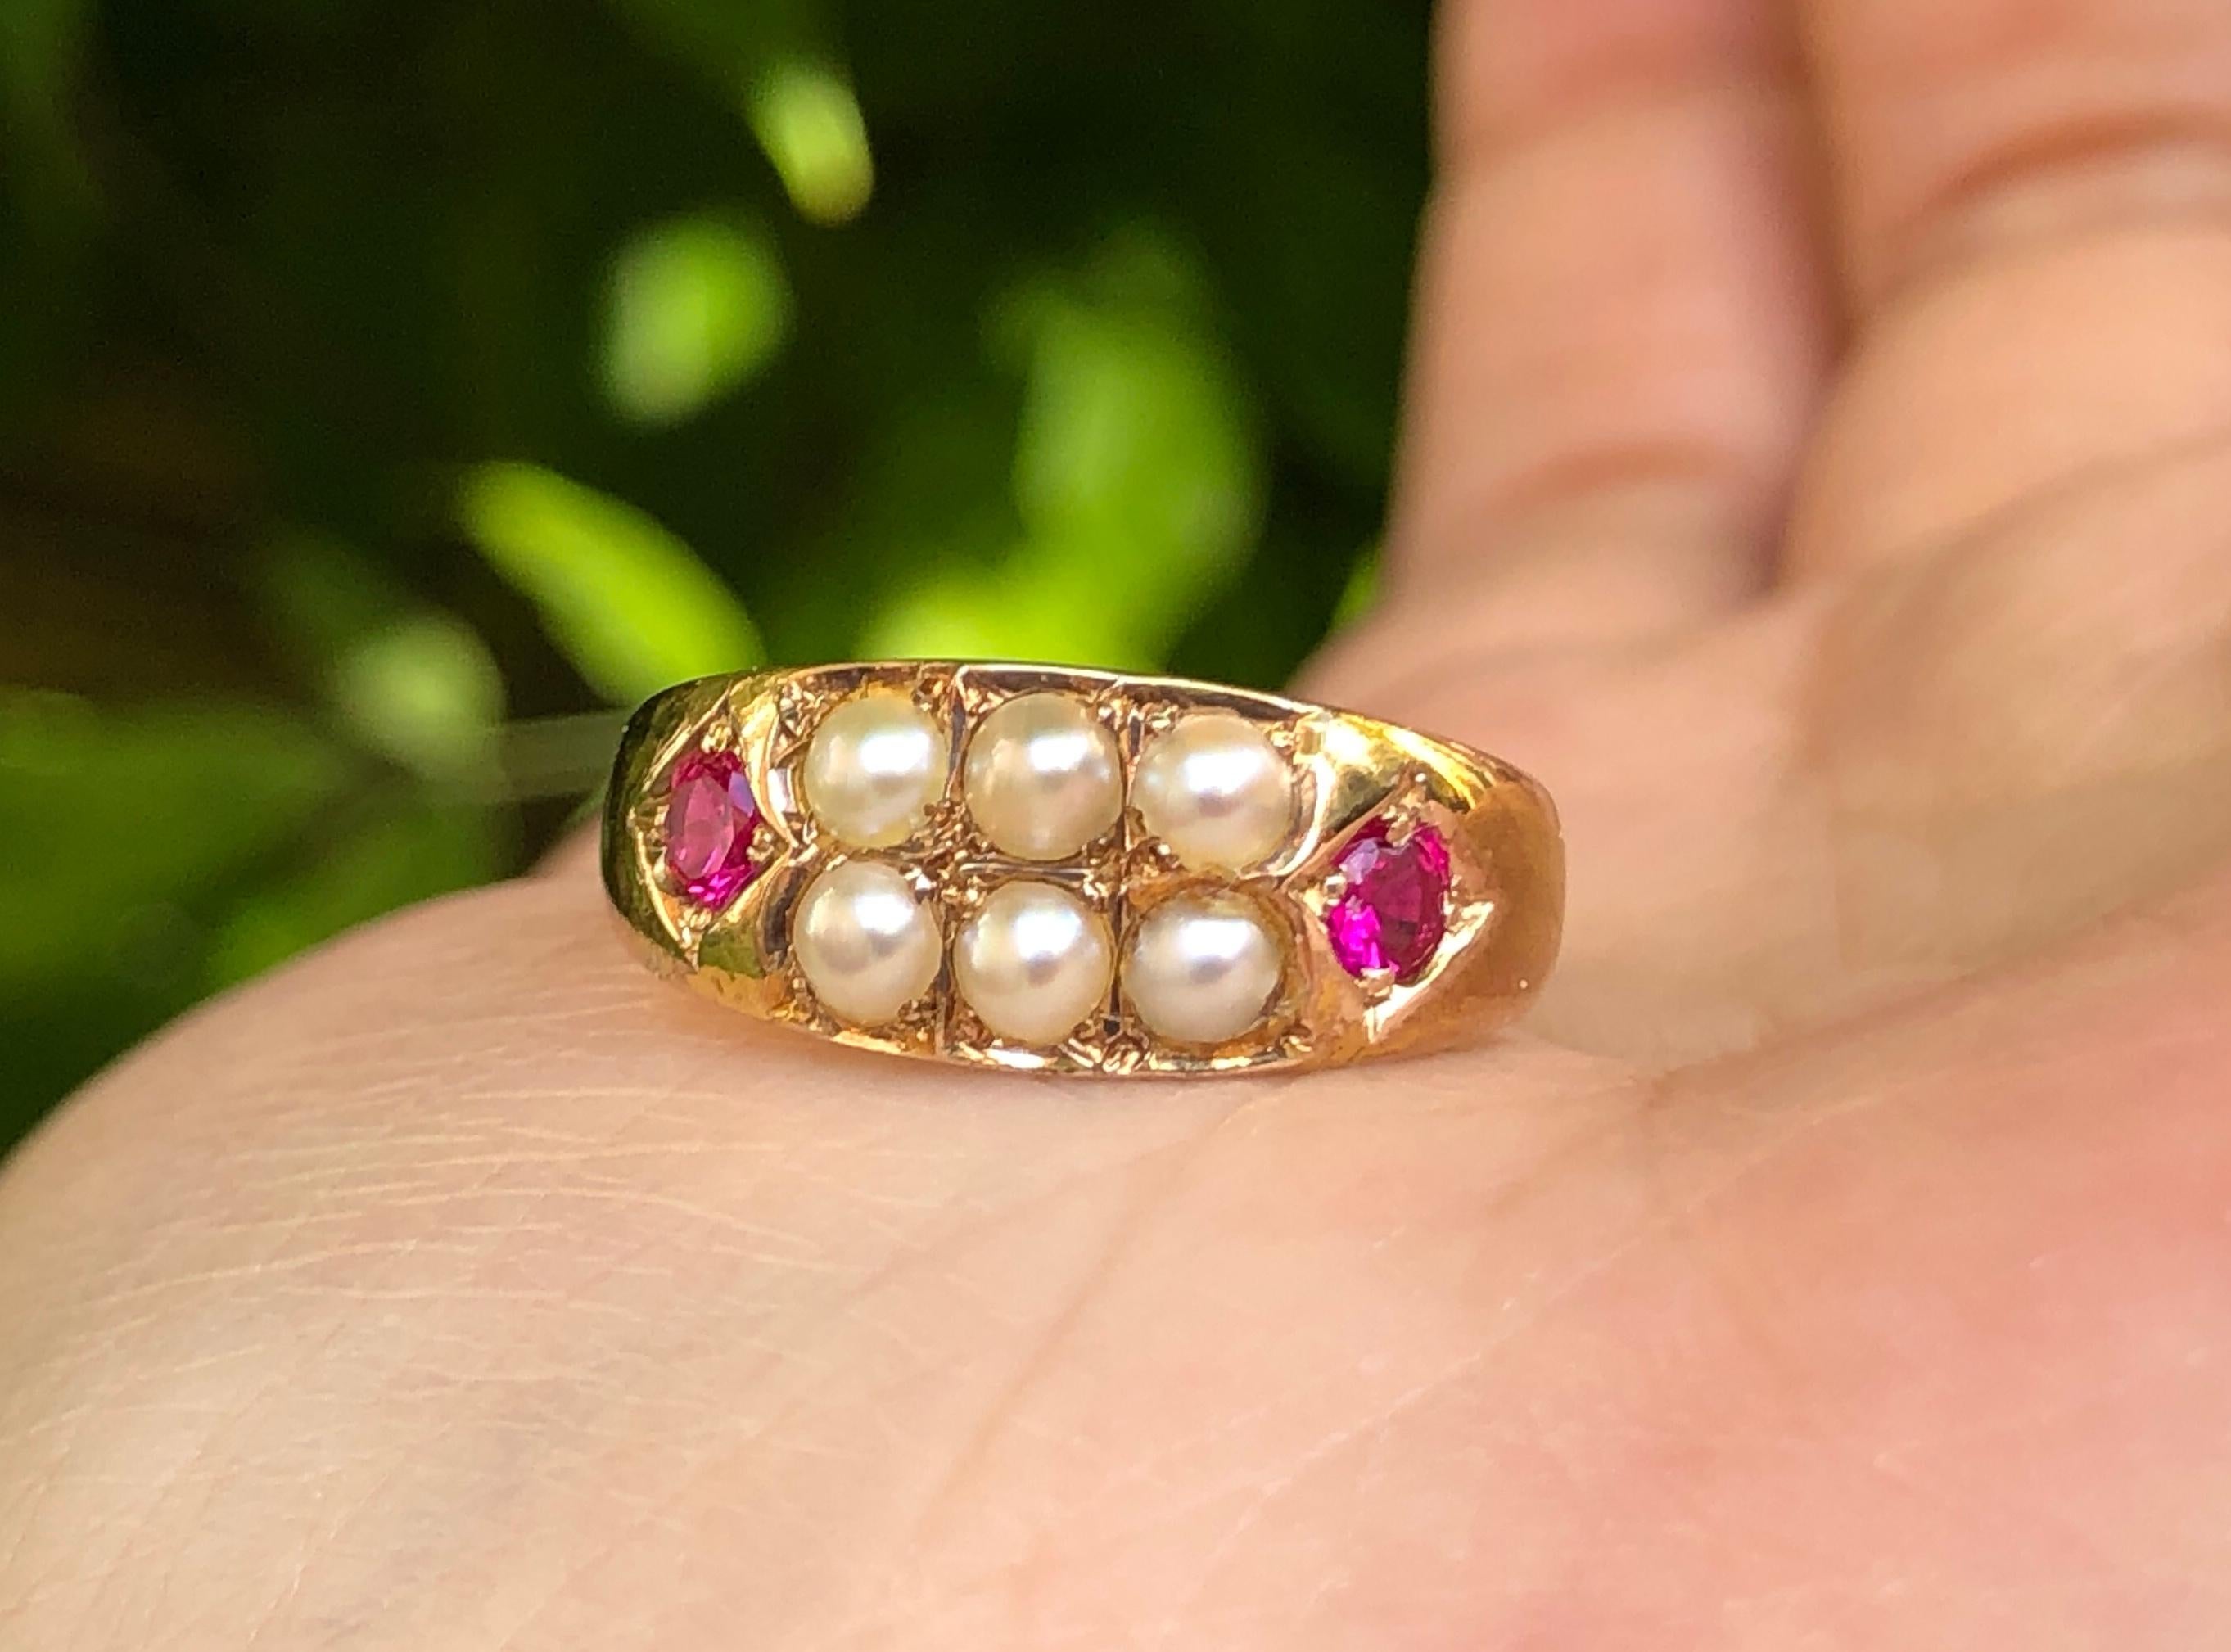 A lovely quality antique Victorian 15 carat yellow gold ring with two round-cut rubies and seed pearls in a gypsy setting. The shank is stamped with  Chester marks to the interior of the band.

It is currently a size  L 1/2 (UK), 6 (US), and can be